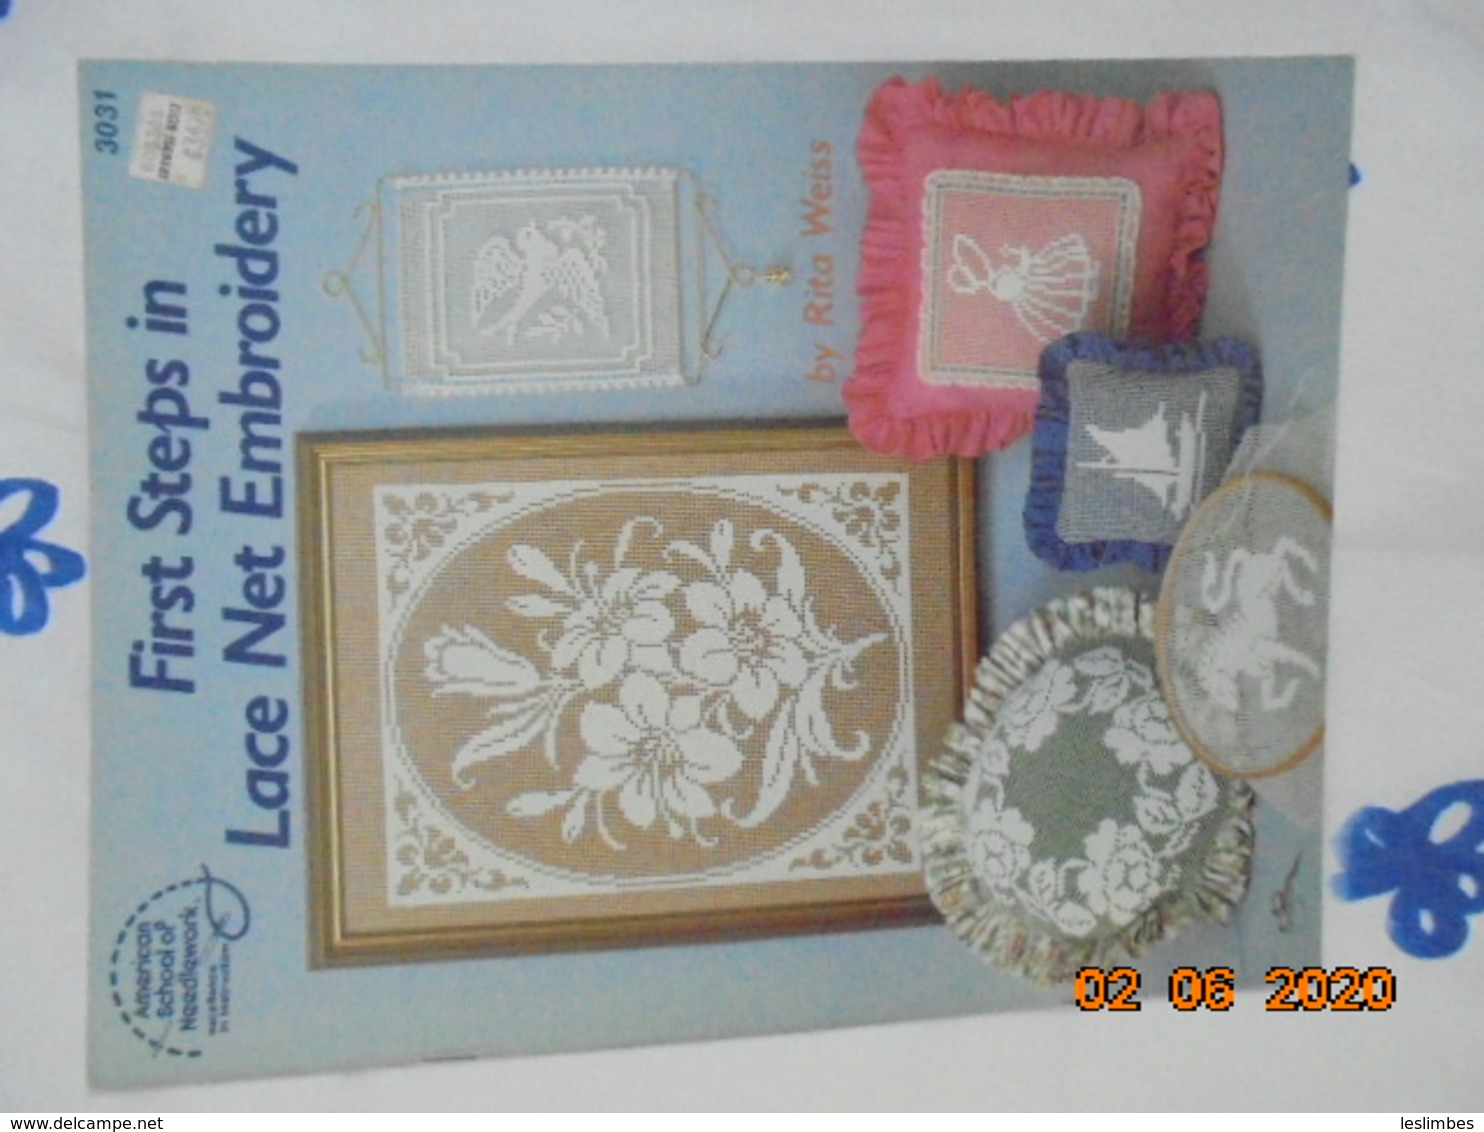 First Steps In Lace Net Embroidery By Rita Weiss ISBN 0881950815 American School Of Needlework 1984 - Crafts